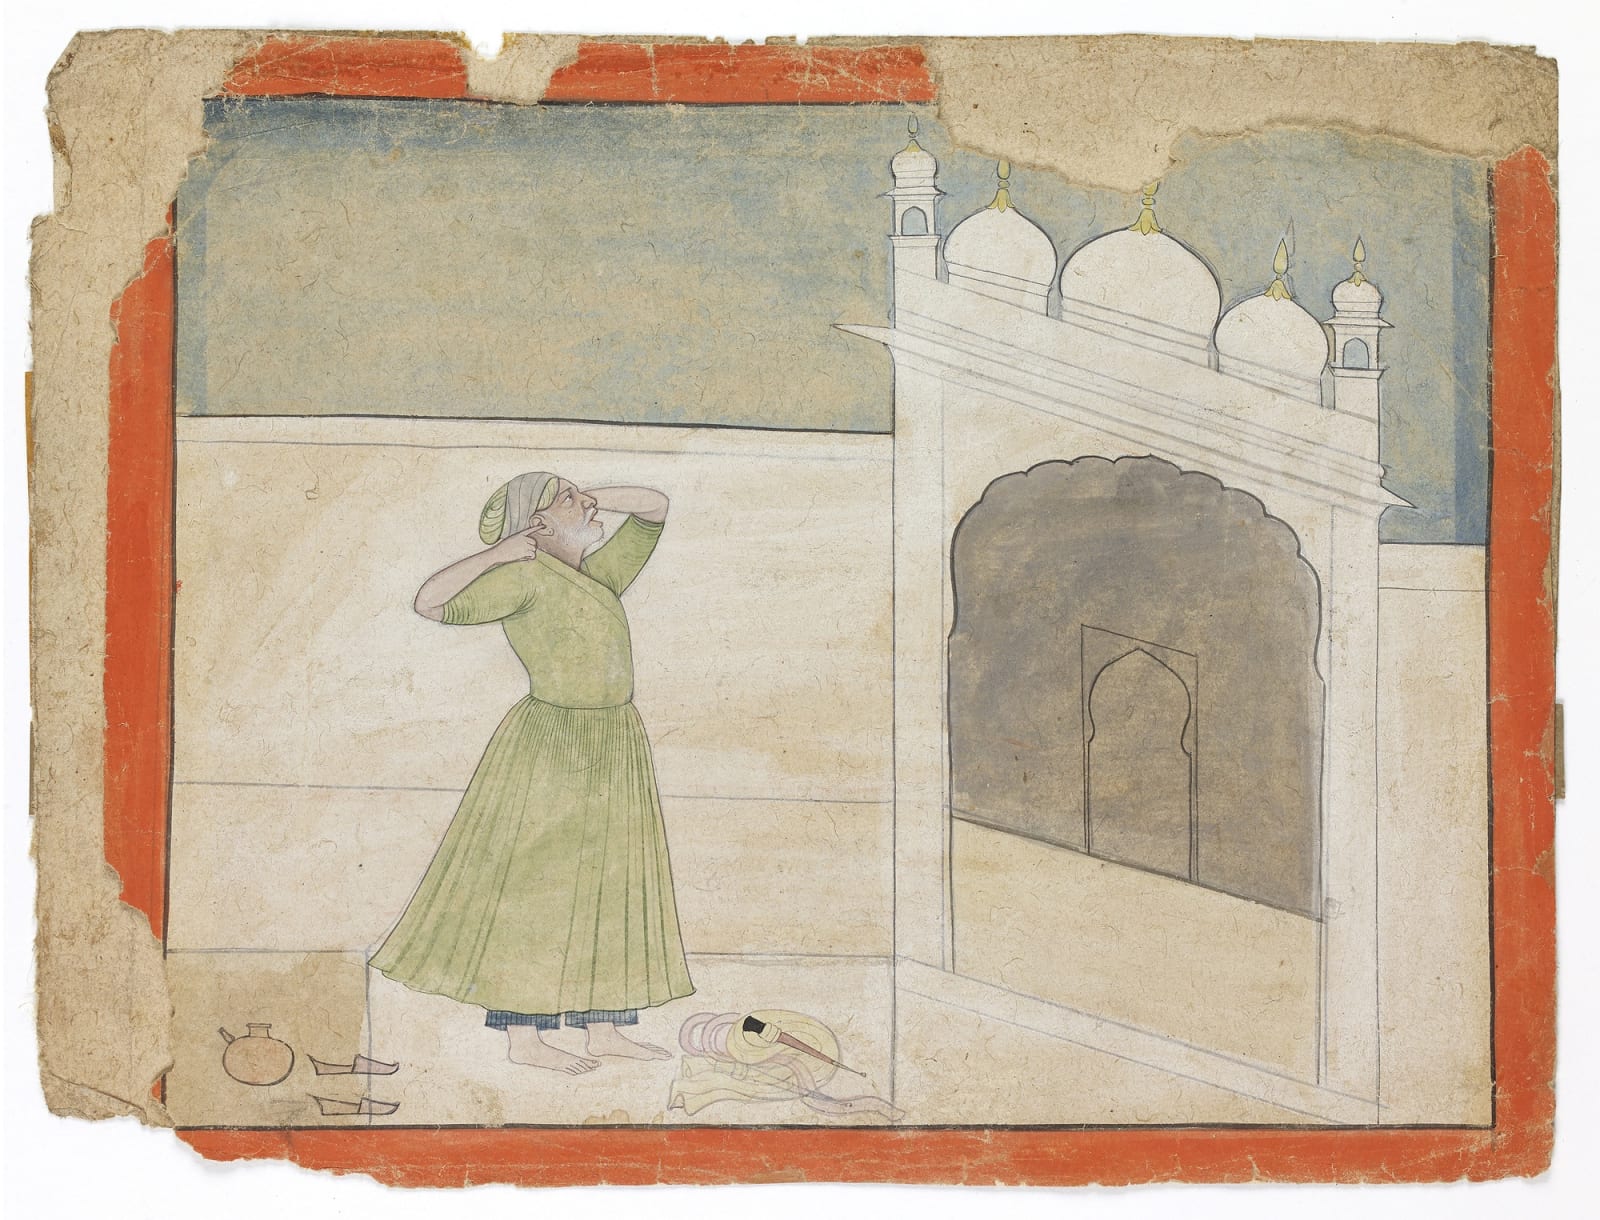 A man with his fingers in his ears standing before a gateway, Pahari, after Nainsukh, 1770-80